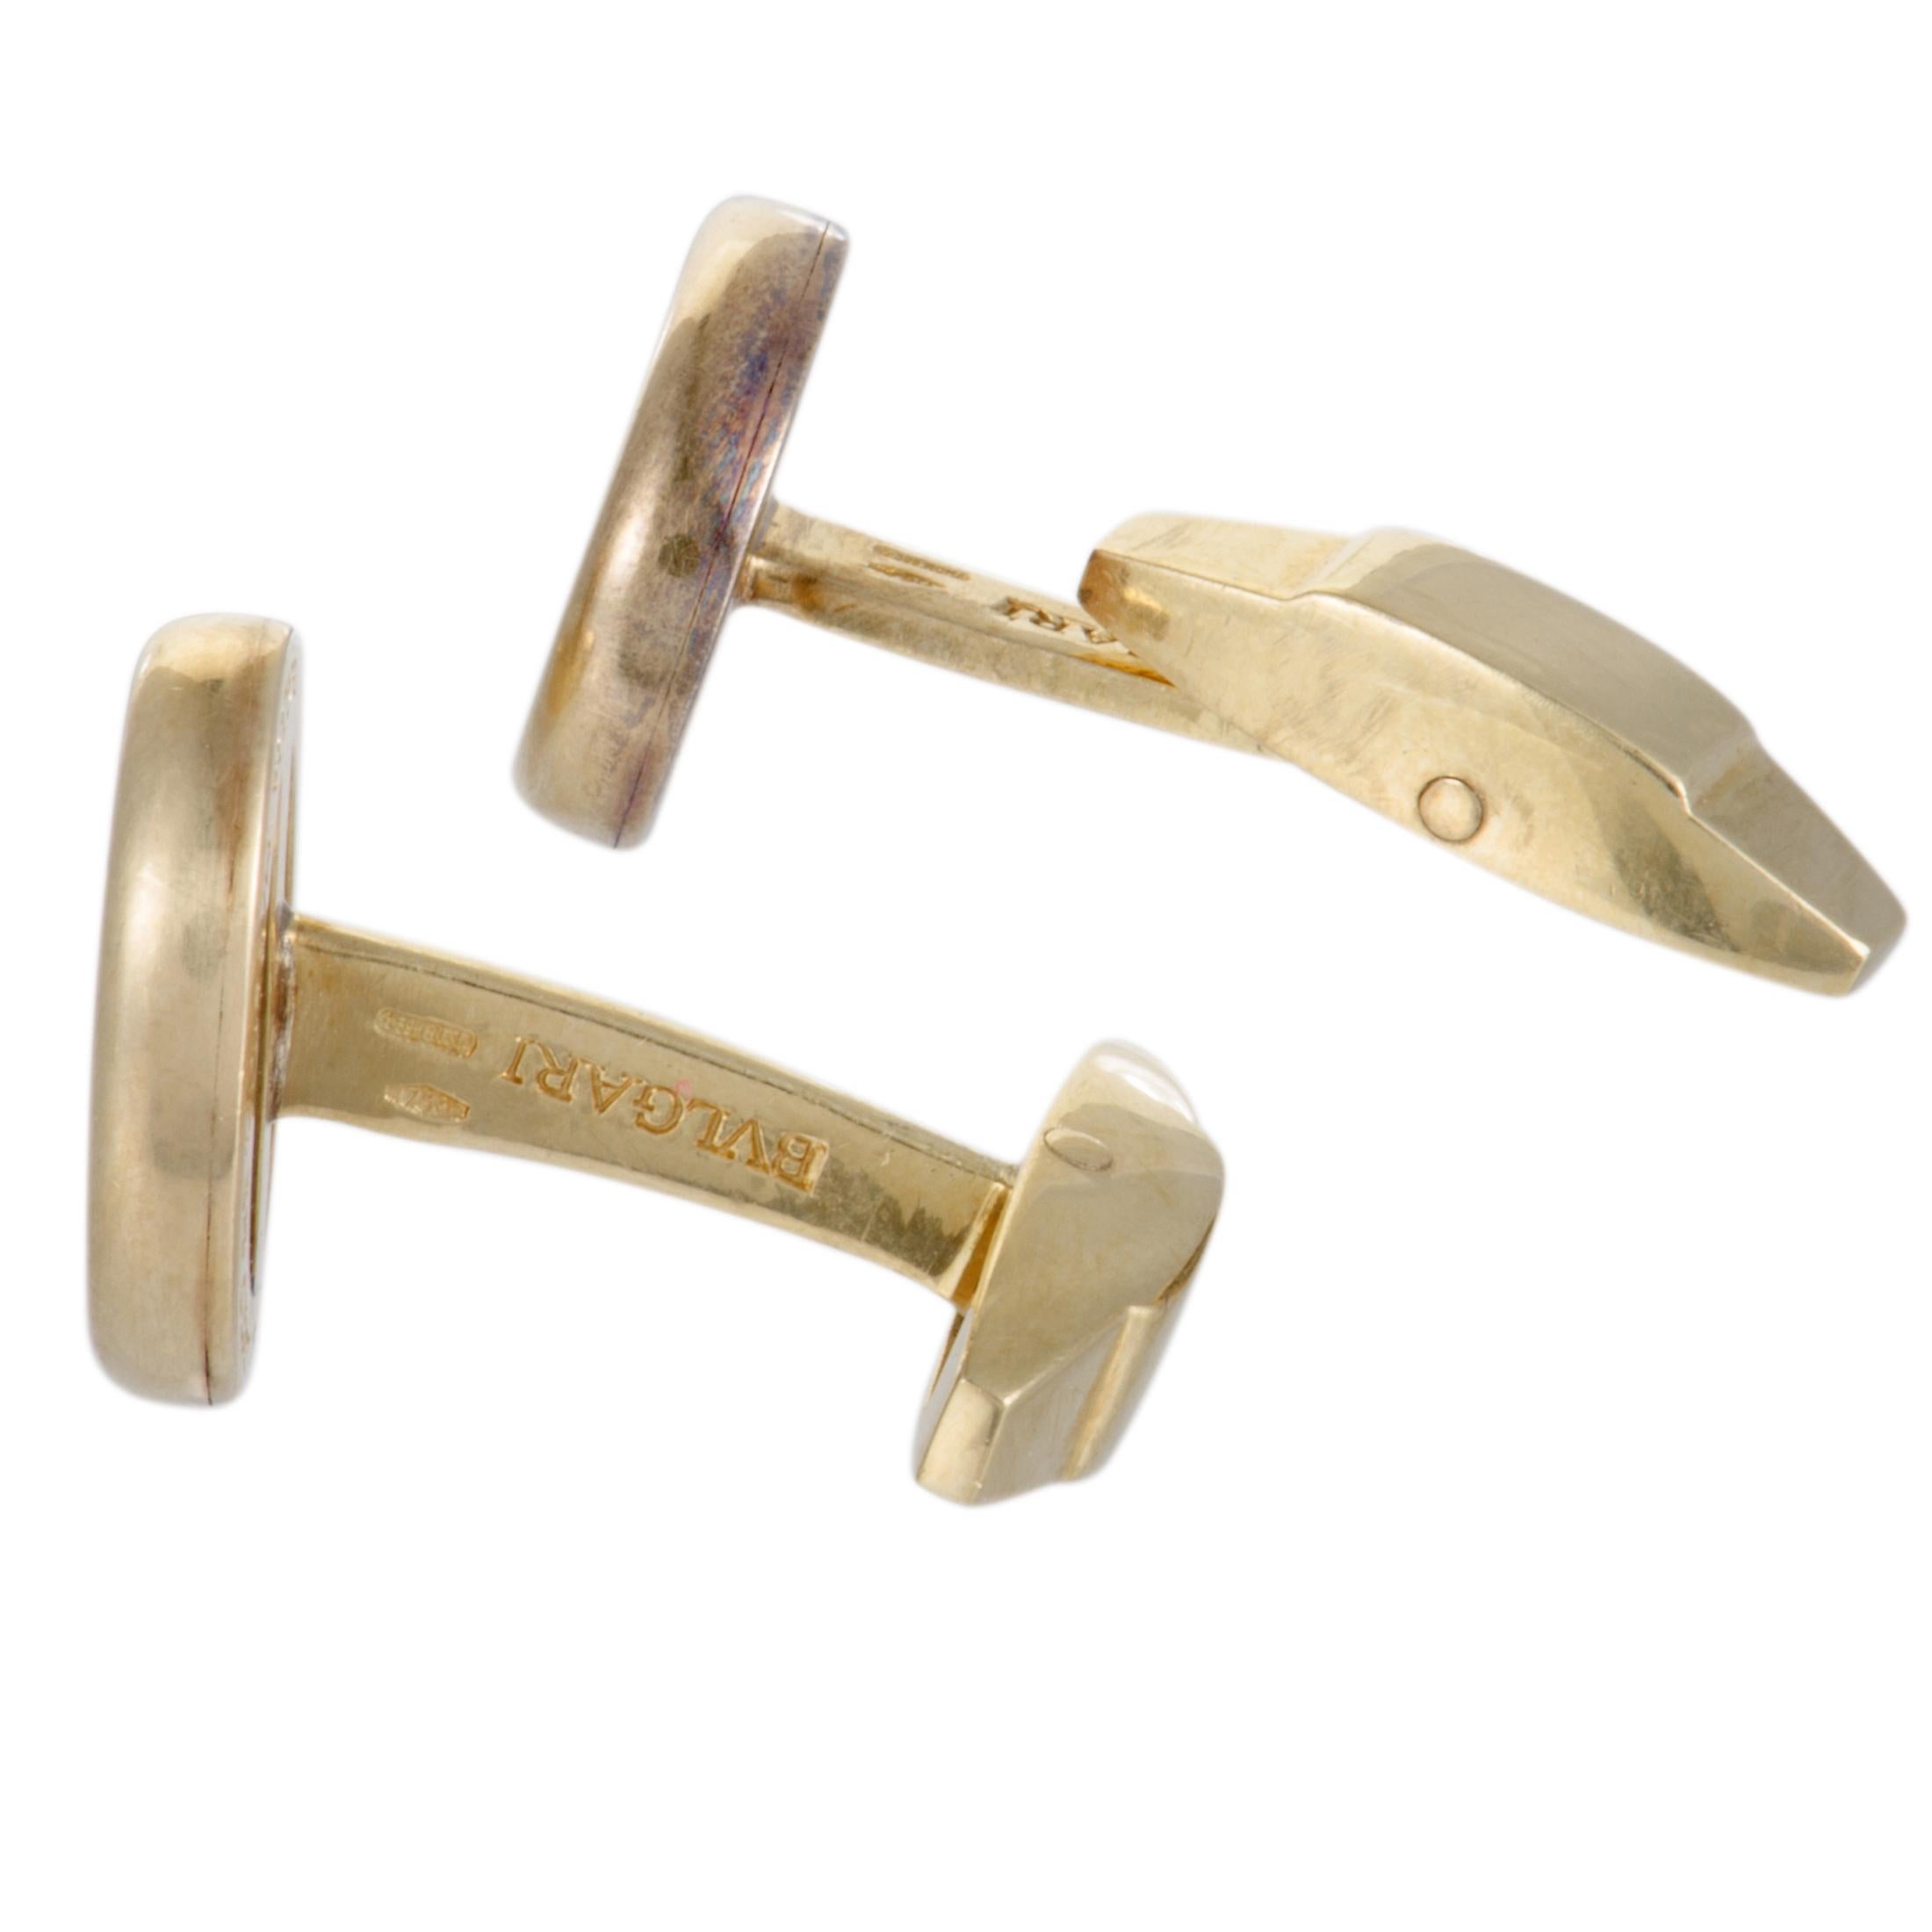 These stunning vintage cufflinks are a Bvlgari design and offer a captivatingly masculine appearance. The cufflinks are made of luxurious 18K yellow gold and each weighs 6.3 grams.
